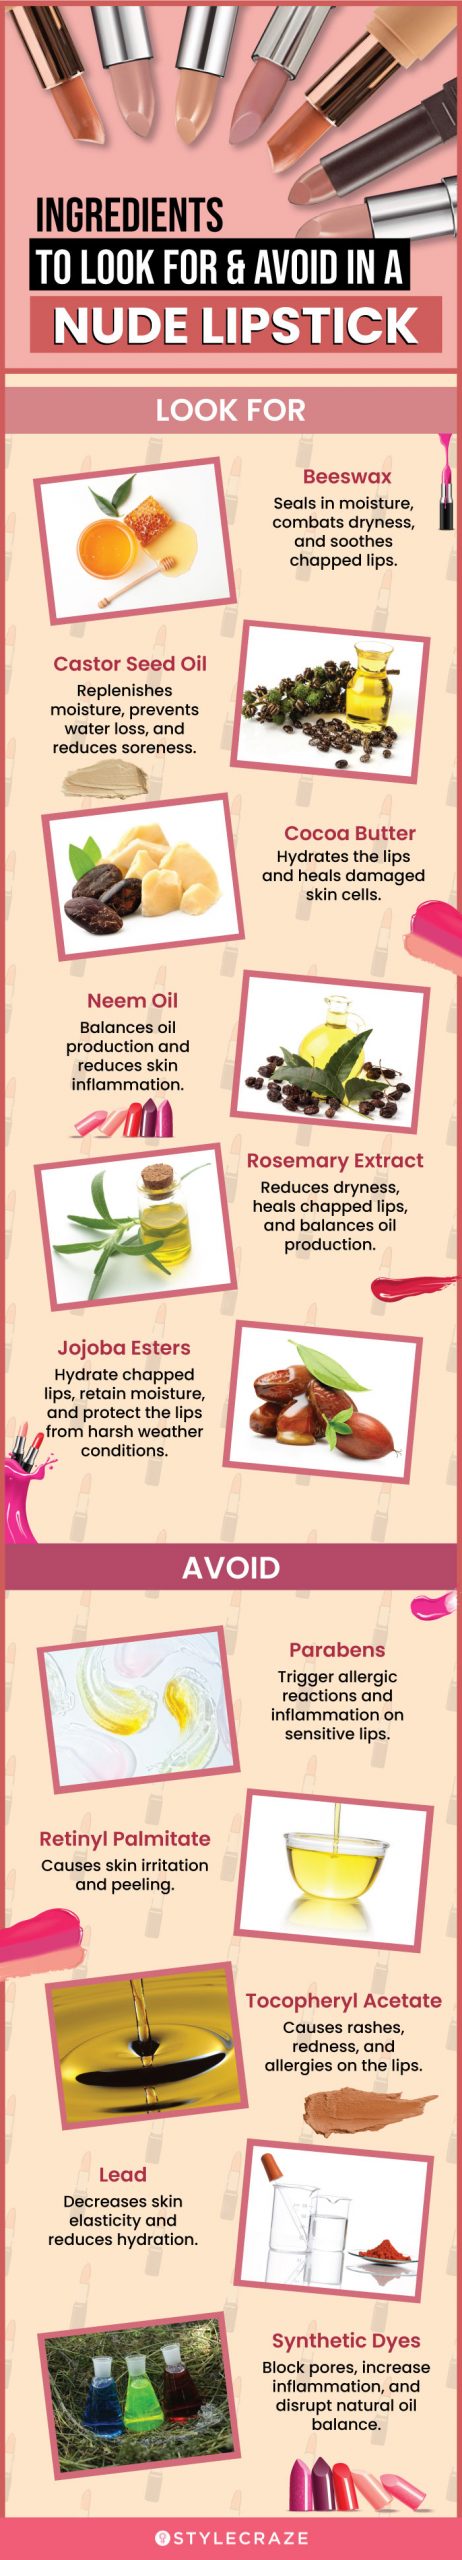 Ingredients To Look For & Avoid In A Nude Lipstick (infographic)